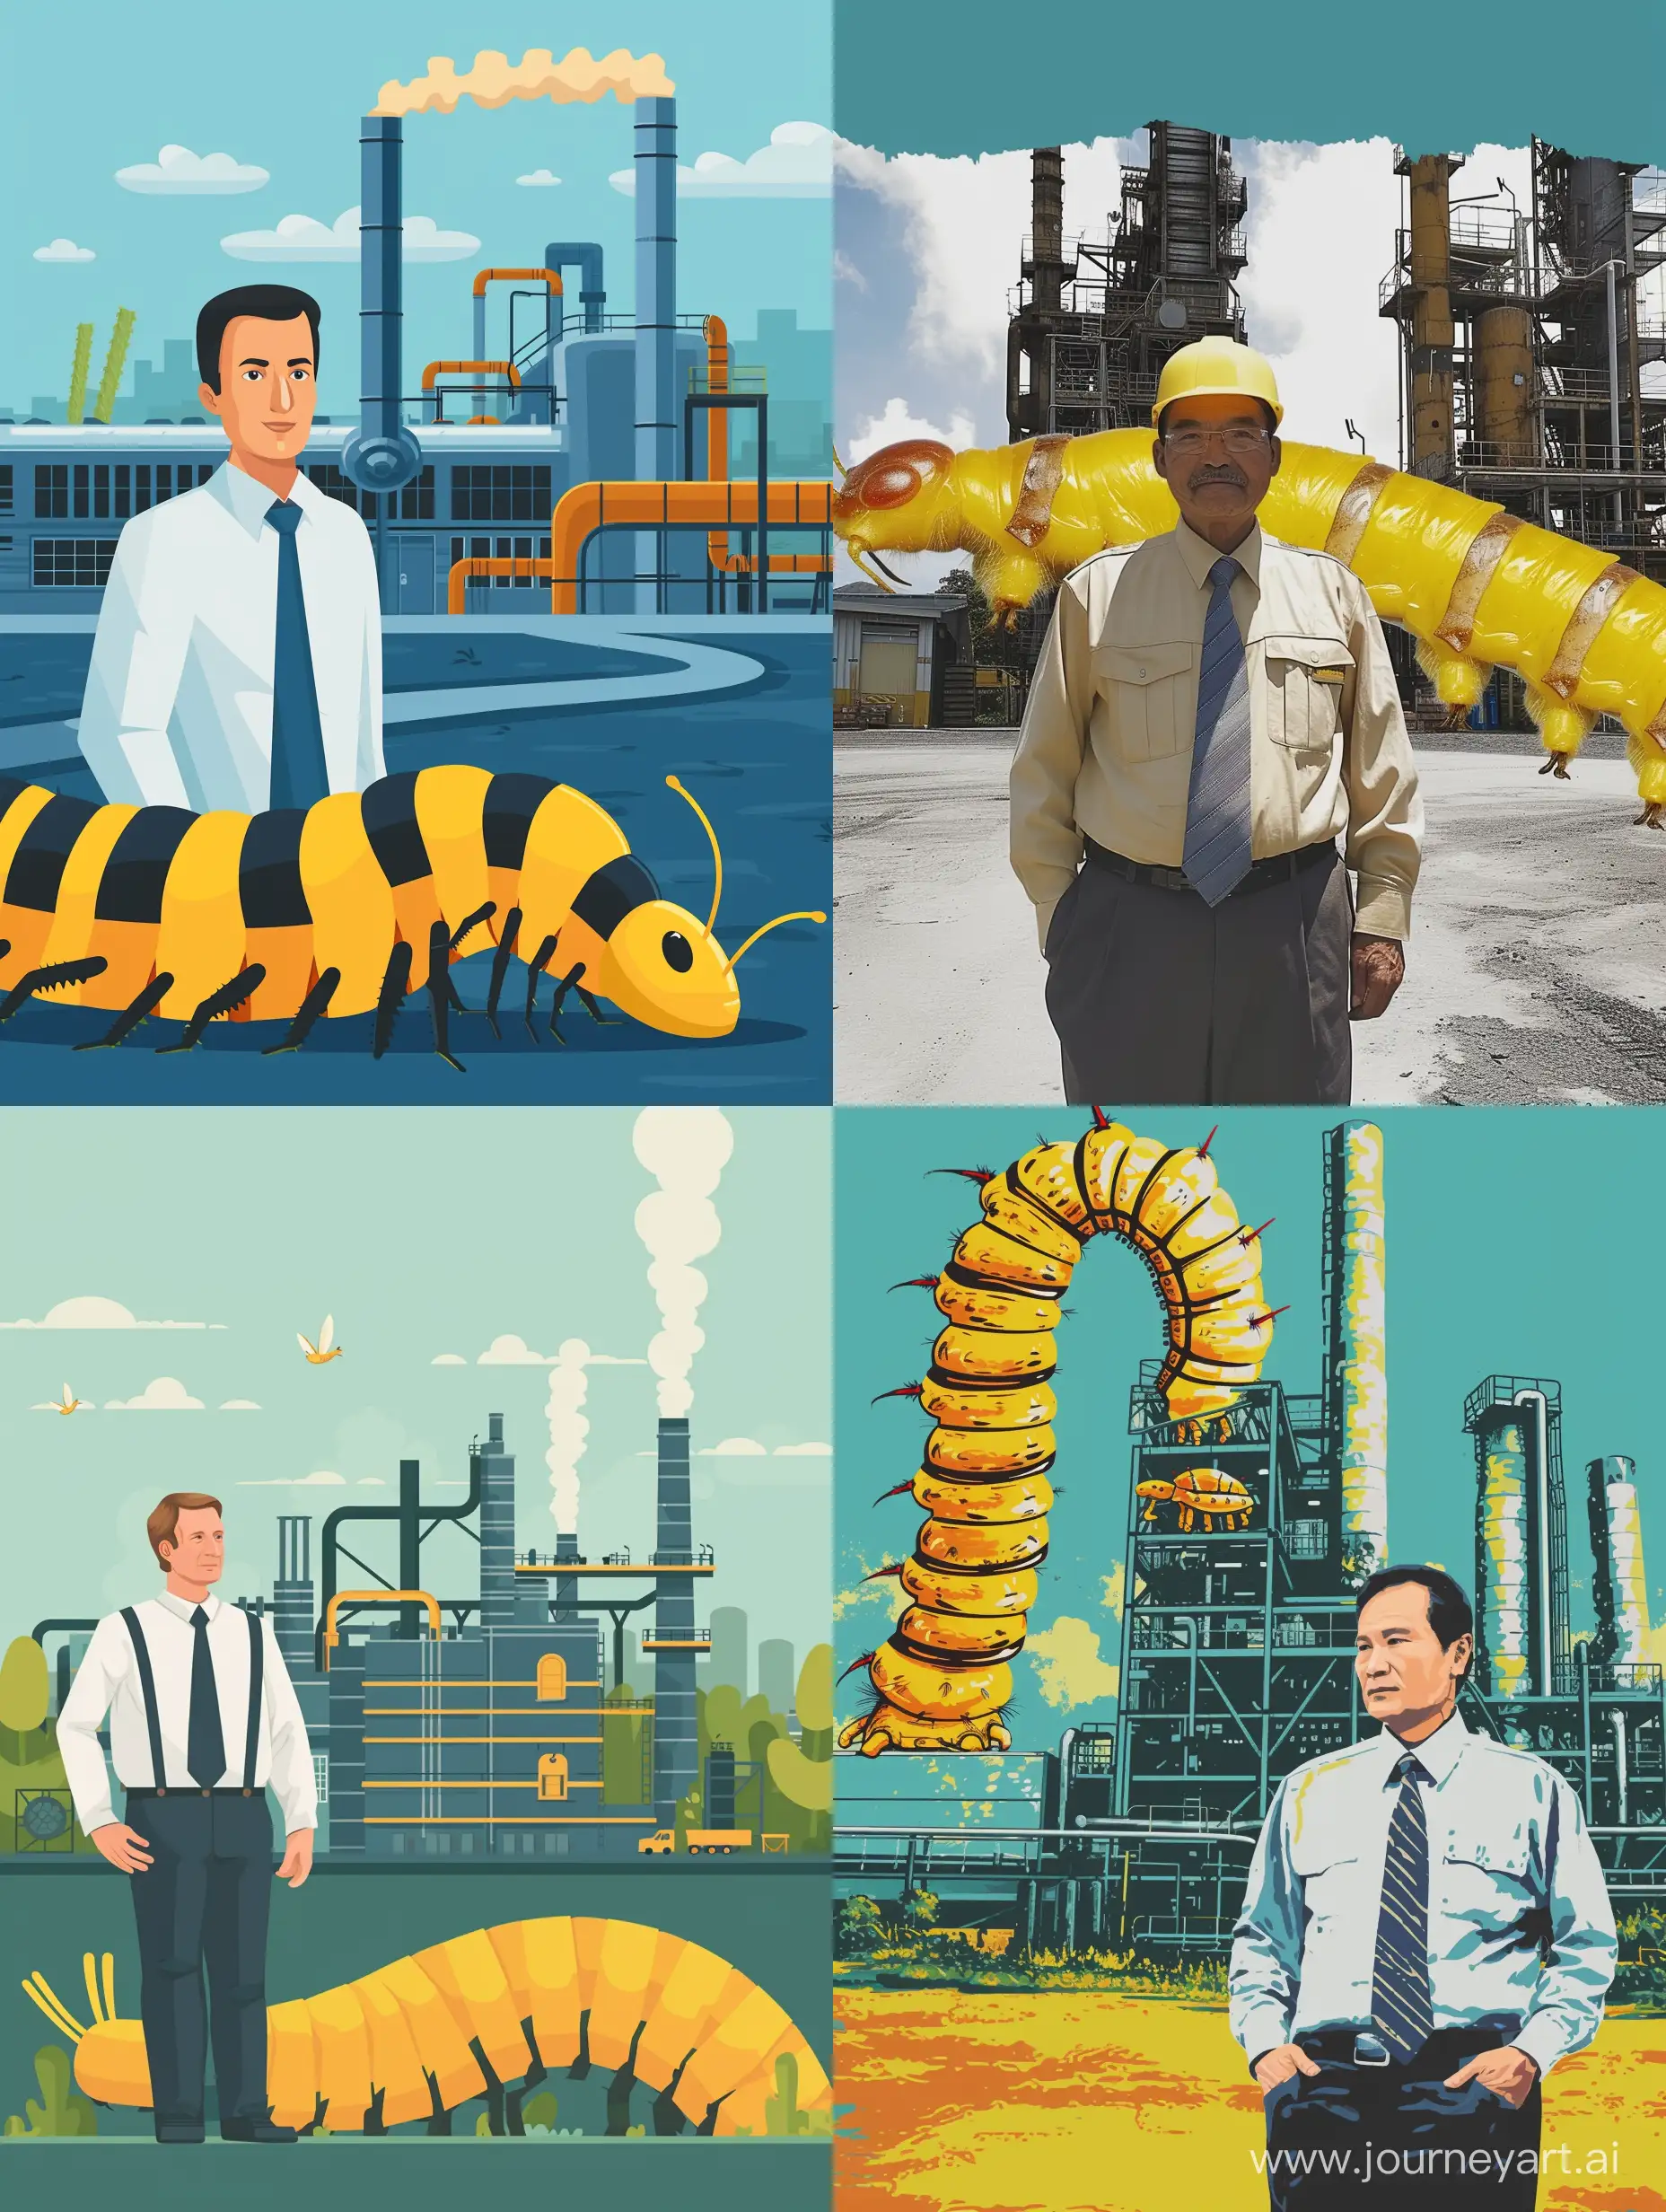 Please make a picture of a factory manager in front of his factory. The color theme of the picture is yellow caterpillar